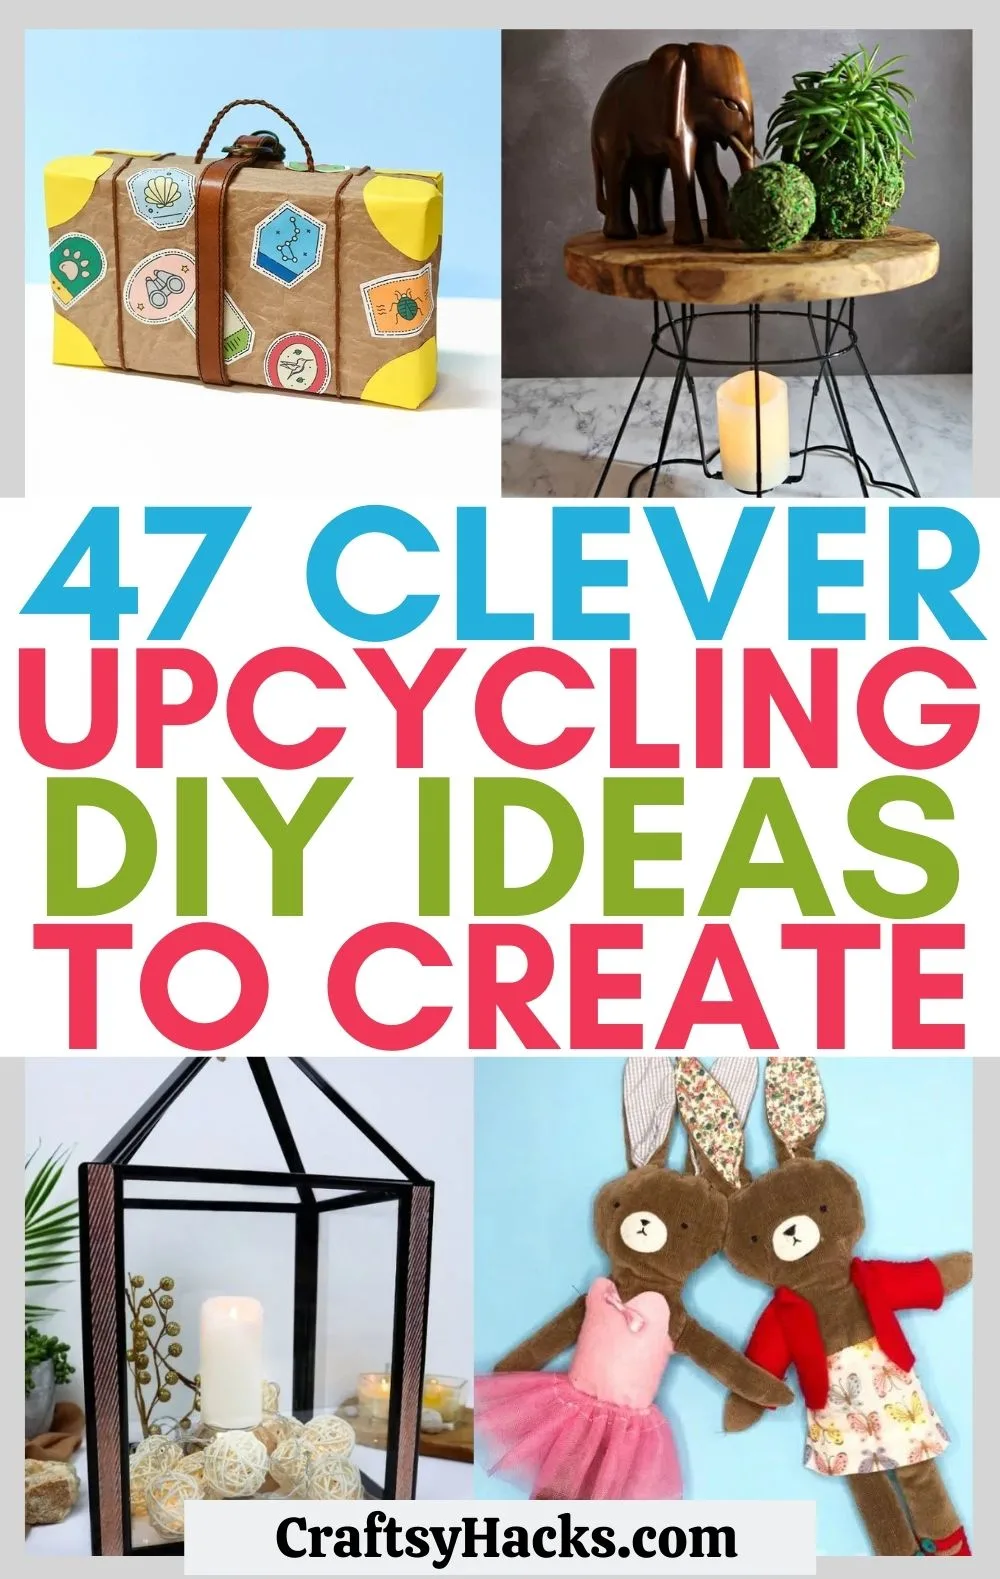 47 Ingenious Upcycling Ideas You\'ll Find Easy to Make - Craftsy Hacks